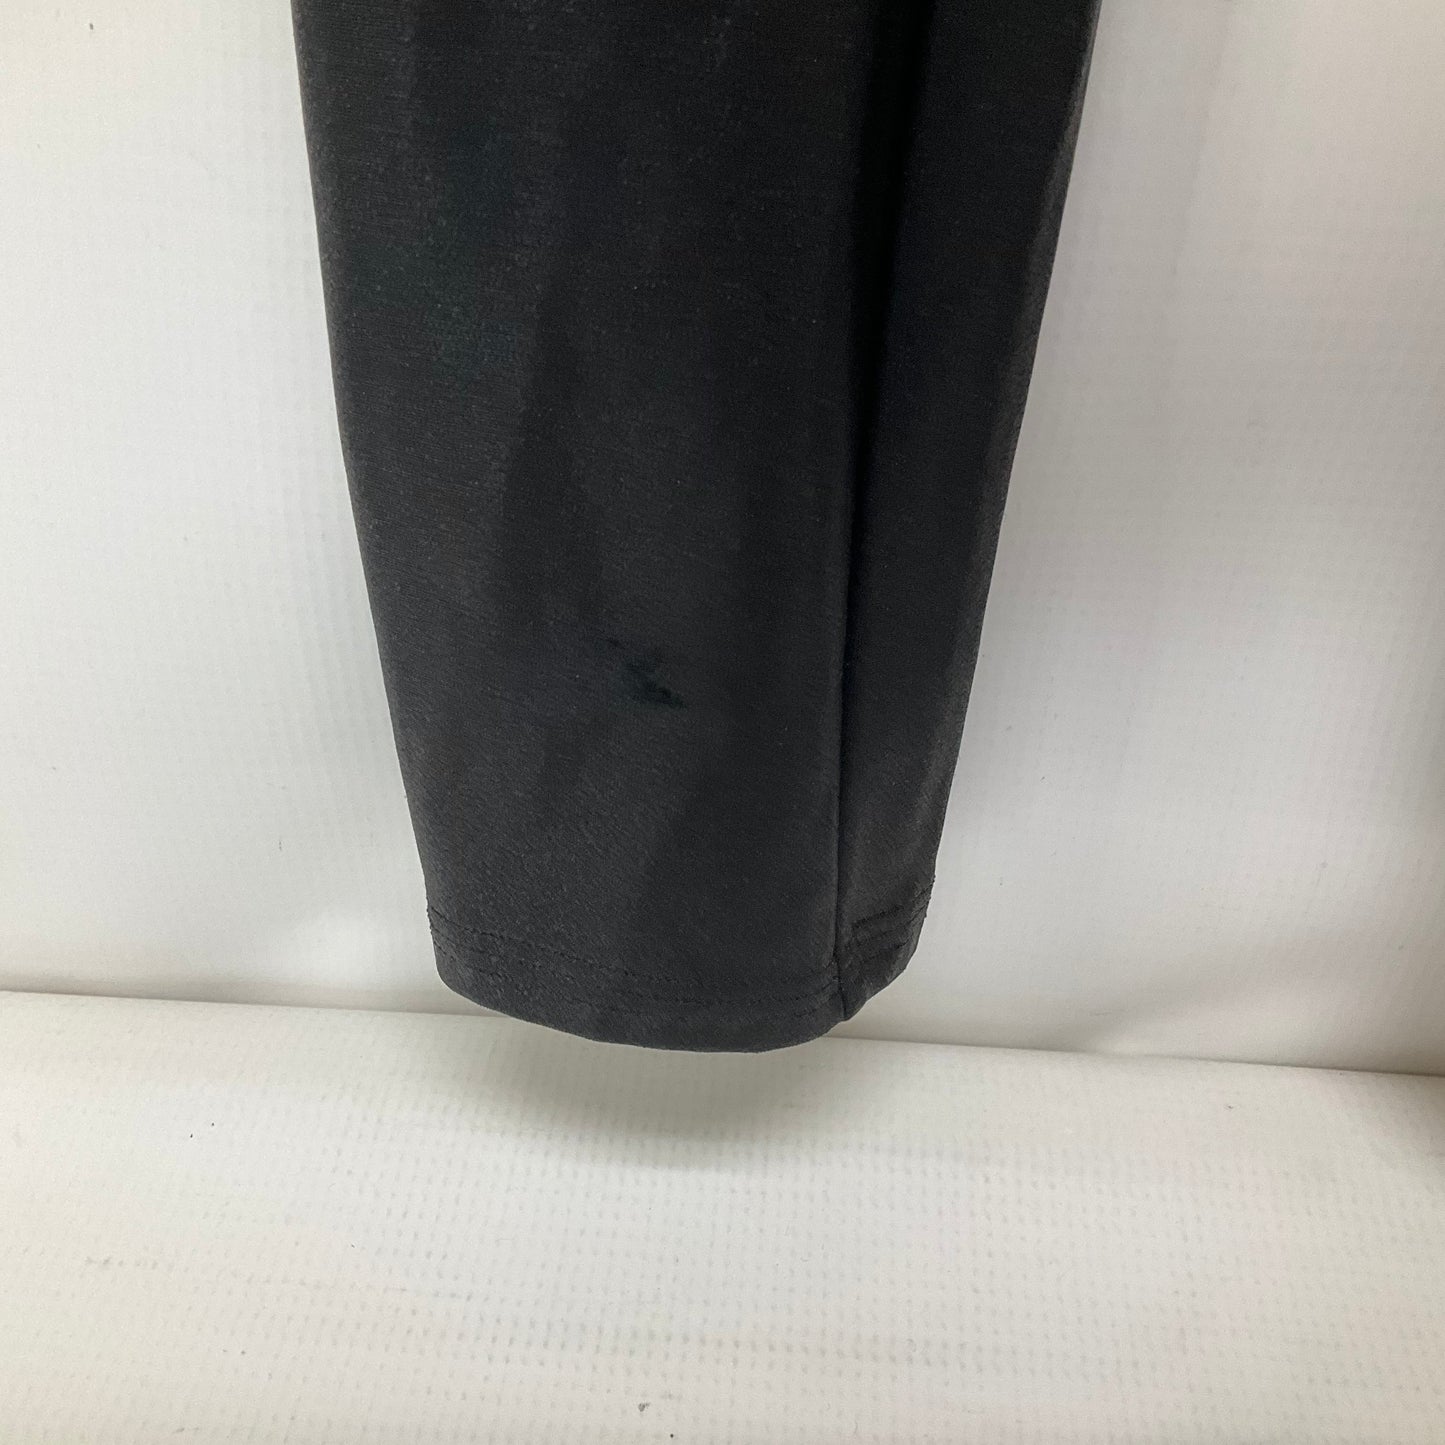 Athletic Leggings By Spanx  Size: M